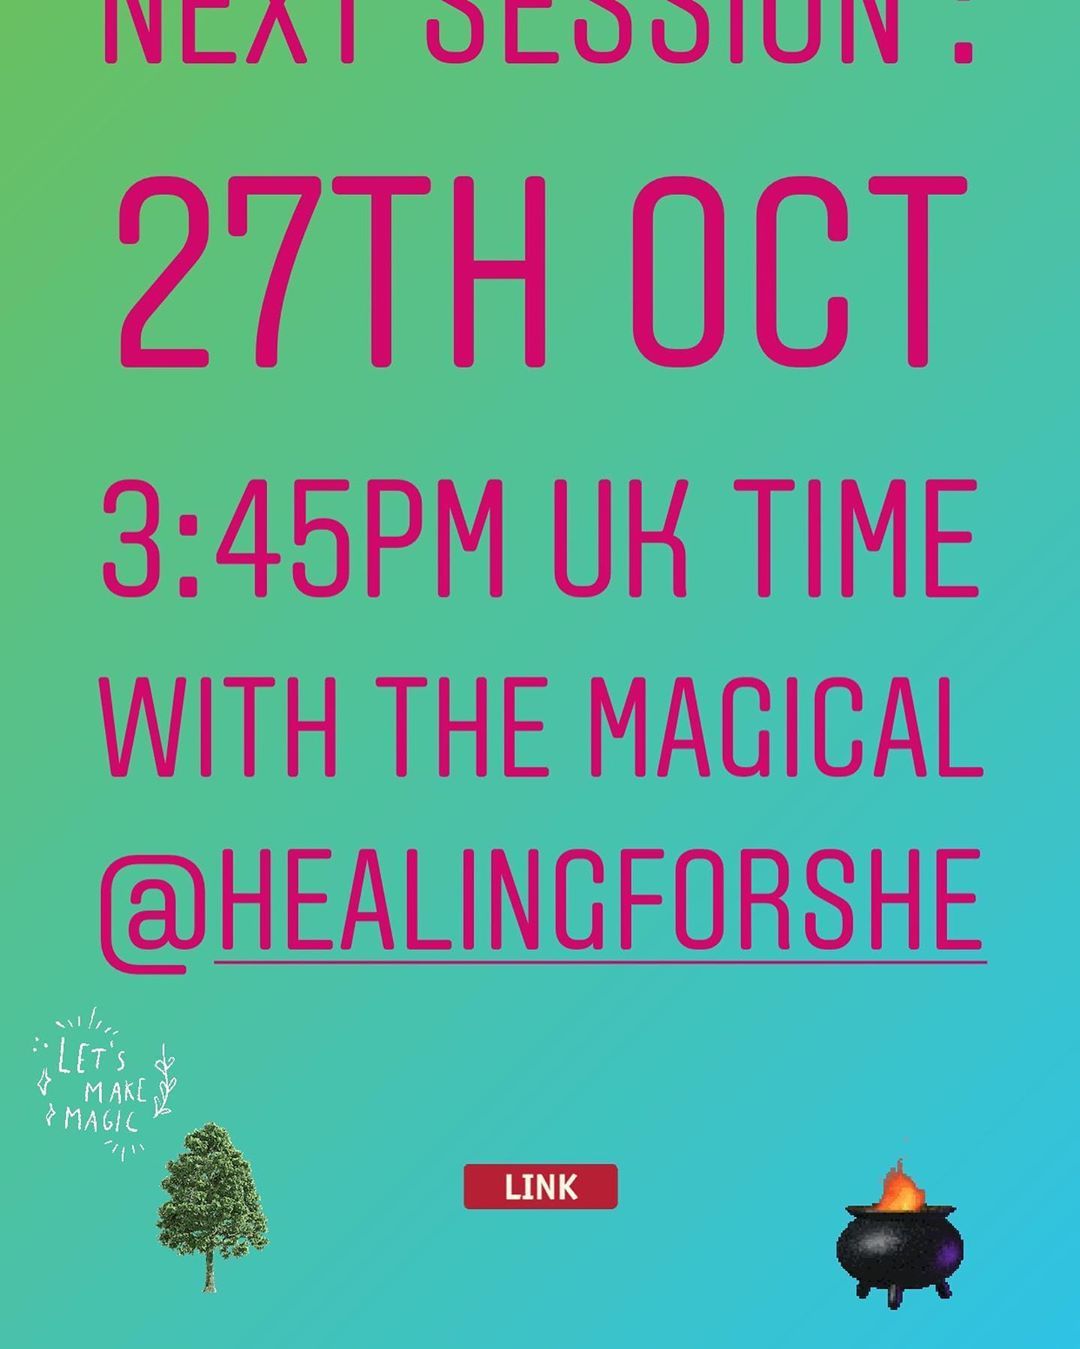 Sign up for my
.
Beautiful
.
Life evolving
.
World warming
.
Heart cradling
.
Power boosting
.
Self worth flowing
.
Monthly webinar
.
(Its free!).
.
This month we have my dear friend, the wonderful healing guide @healingforshe Caroline Fearns joining...